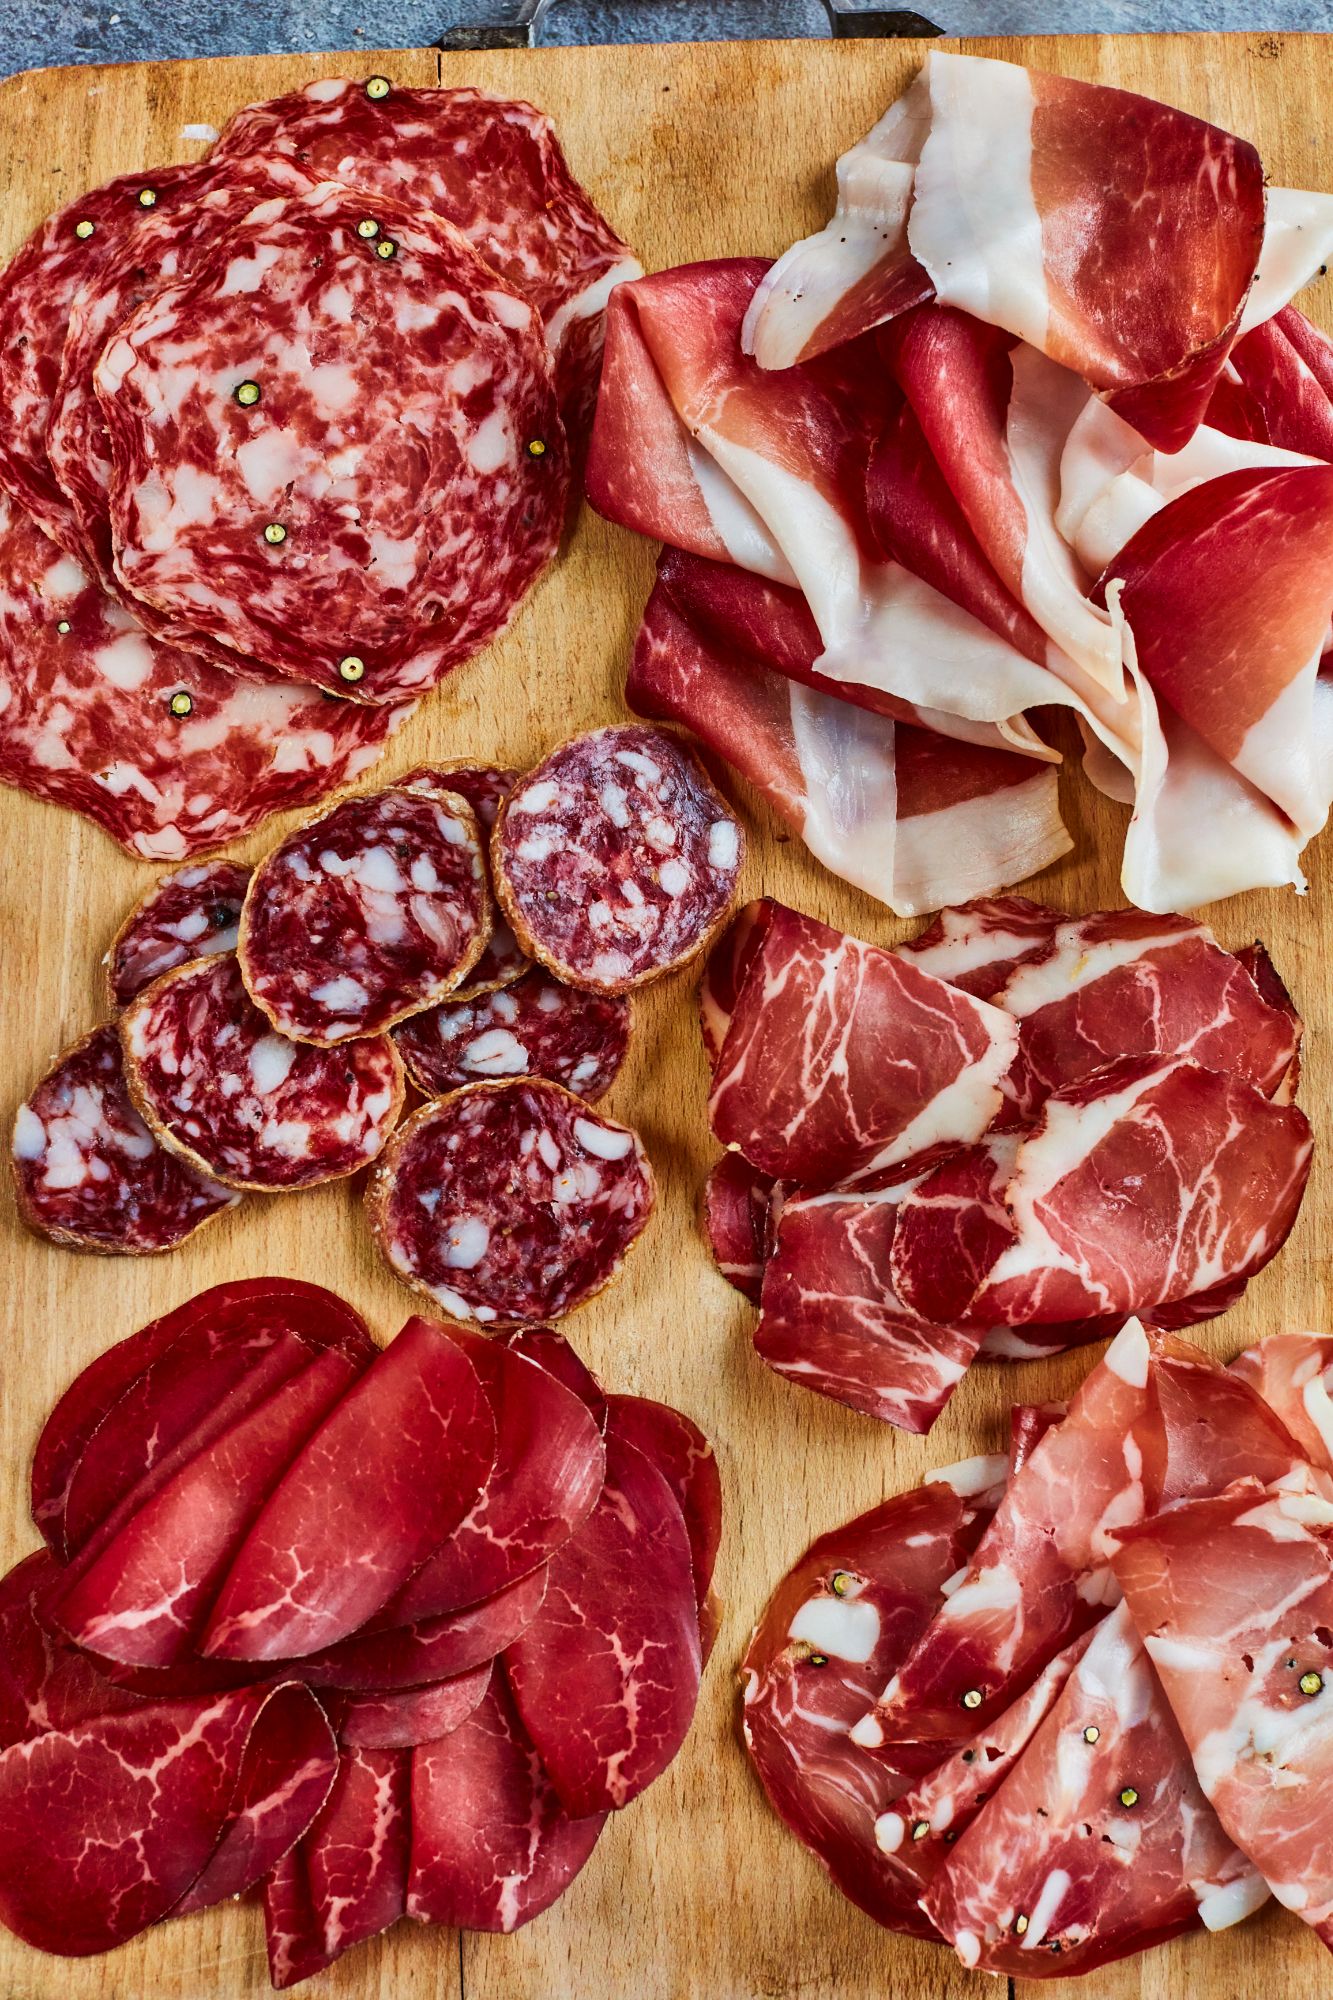 Where our cured meats come from...